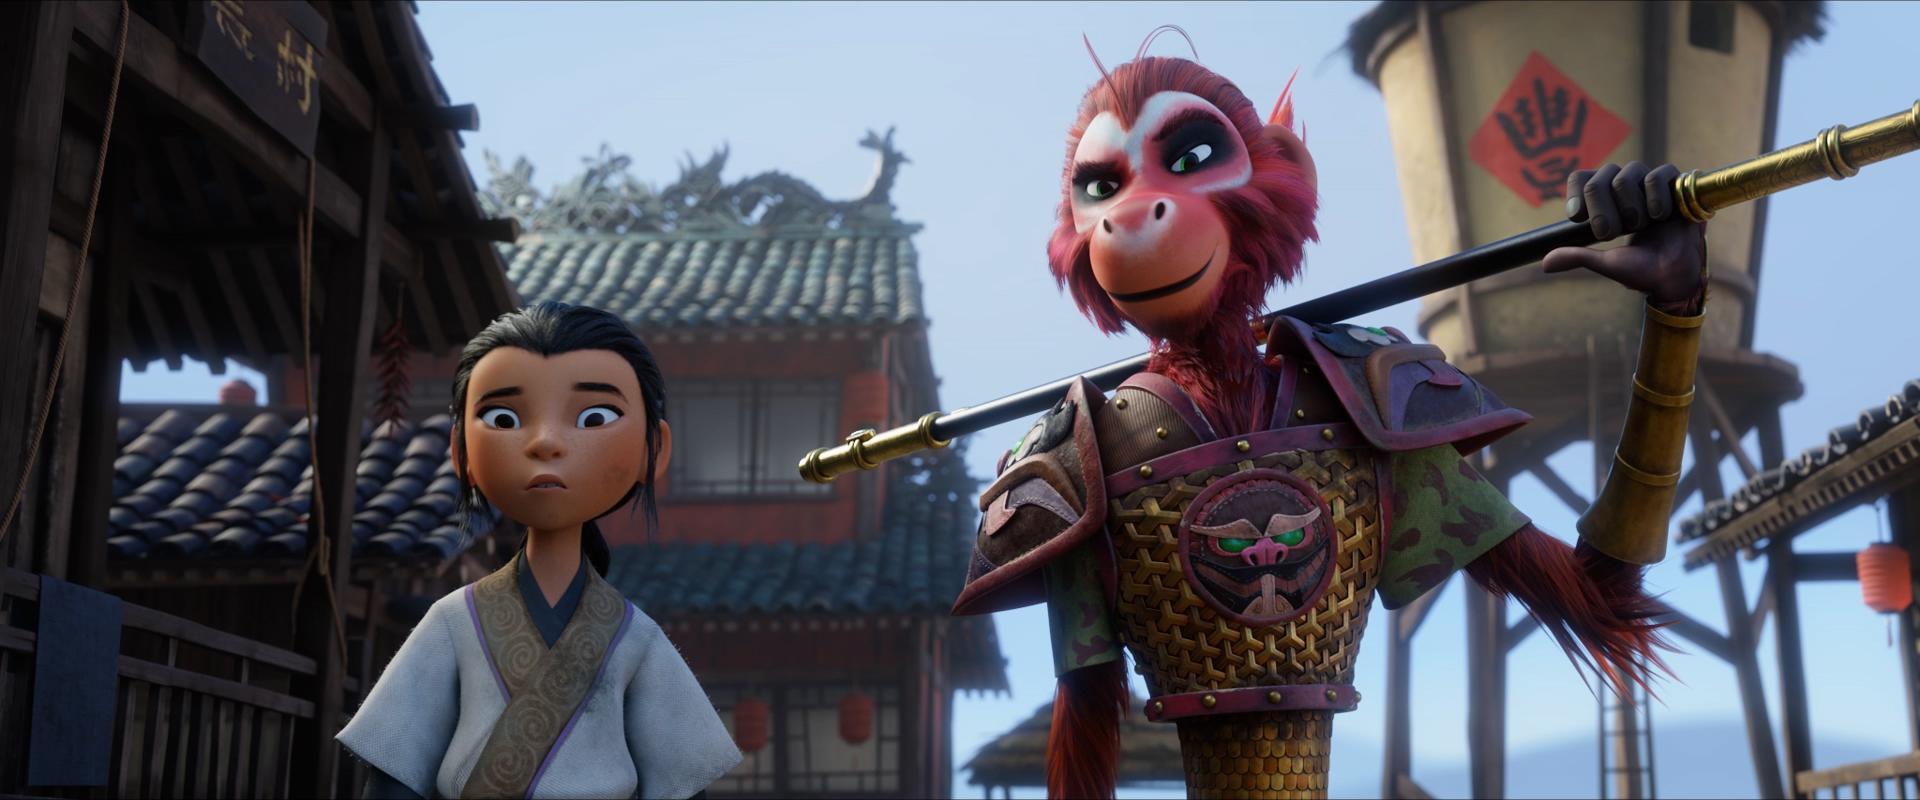 Through battles against demons, dragons, and even his own ego, the Monkey King's epic quest is an enthralling tale of self-discovery and bravery. (August 18)